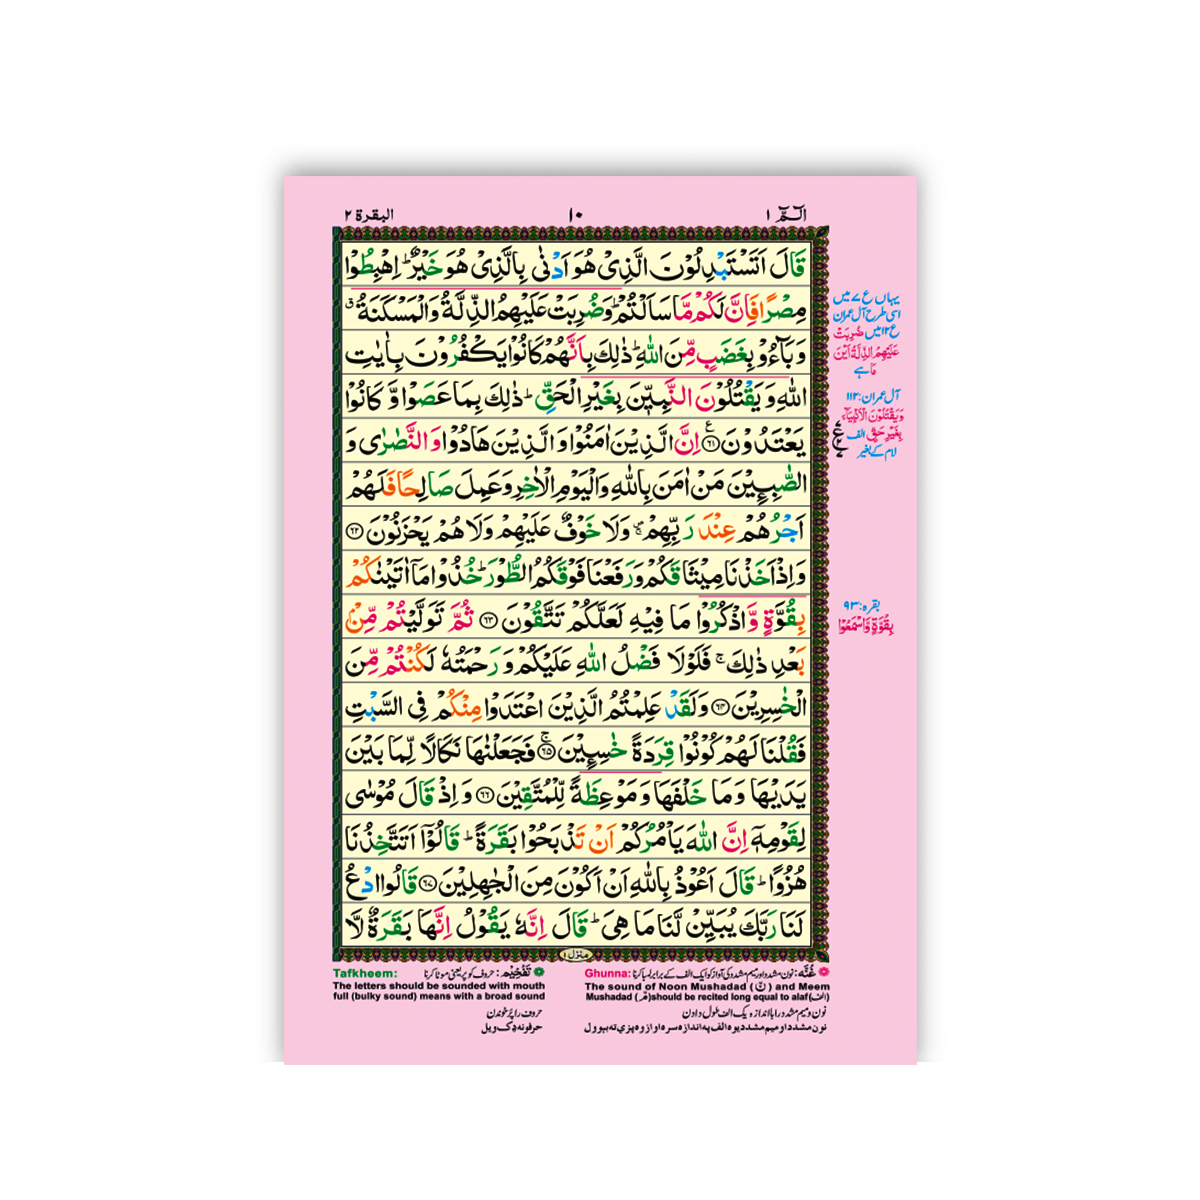 [877/4K] Al-Quran-Ul-Kareem In 16 Lines With Tajweed Rules (Without Translation)